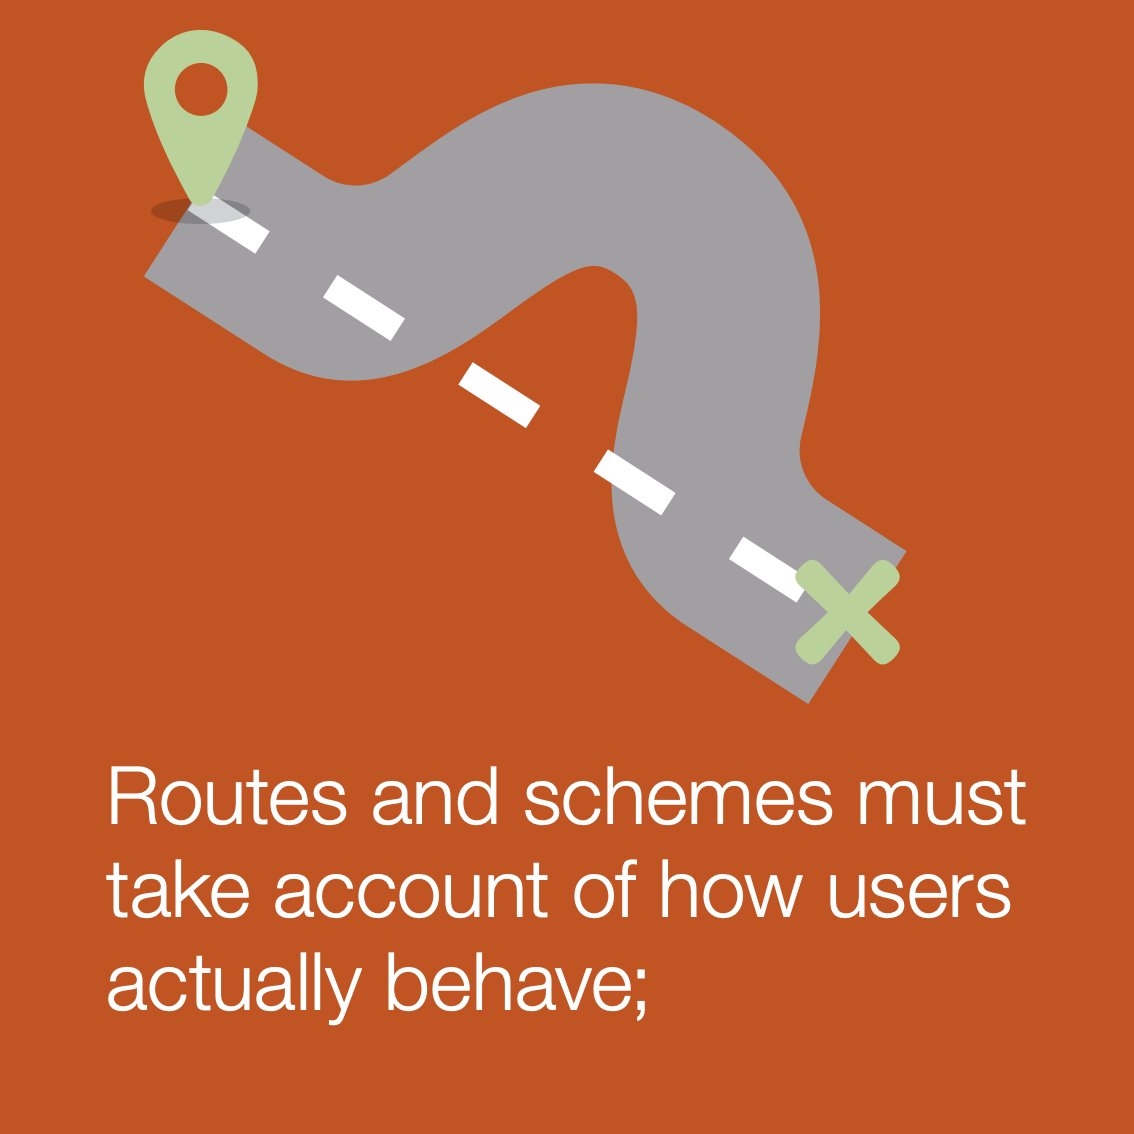 And other Key Design Principle from  @transportgovuk:"Routes and schemes must take account of how users actually behave."